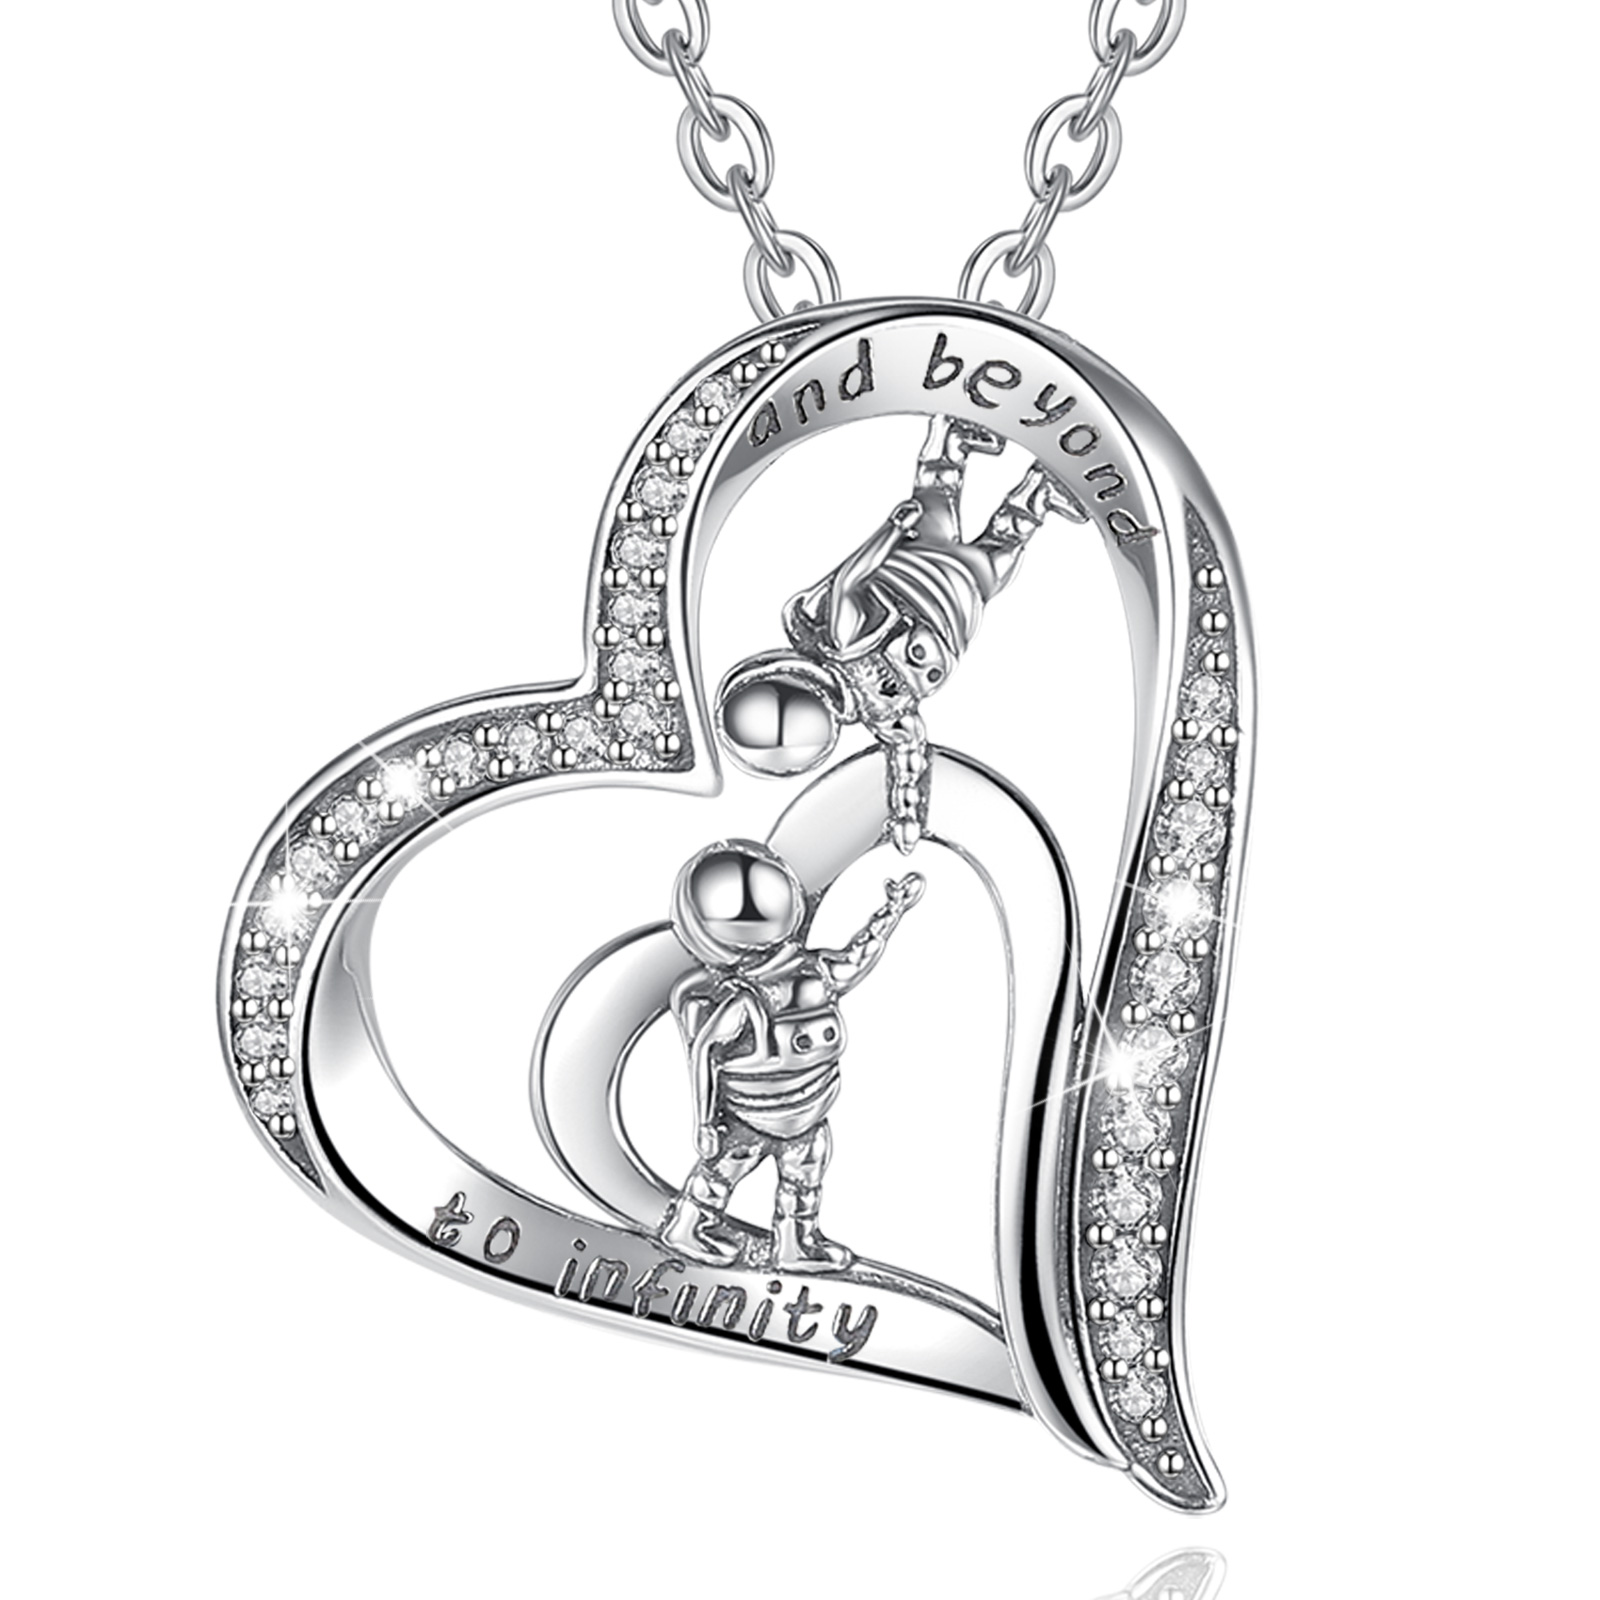 Merryshine Jewelry Best Friends S925 Sterling Silver Spaceman Design Heart Shaped Necklace